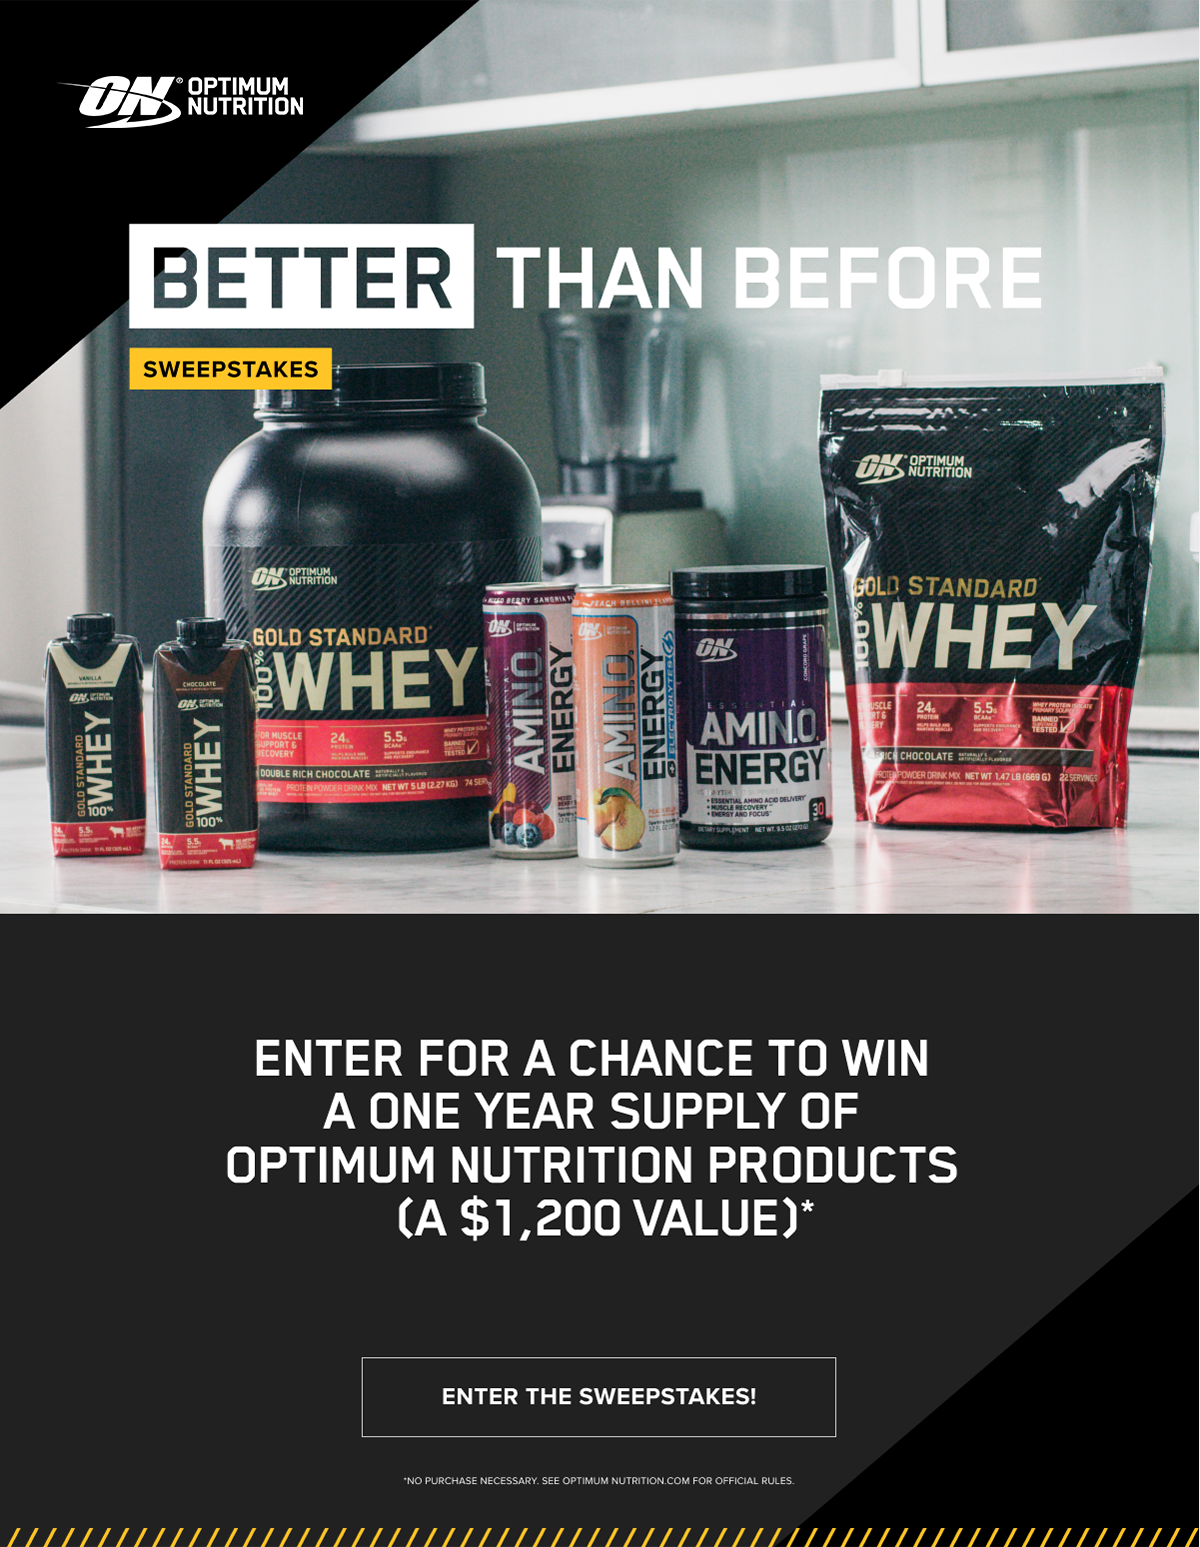 Someone's winning a year's worth of supplements. Enter now for your chance! *No purchase necessary. See optimumnutrition.com for official rules.